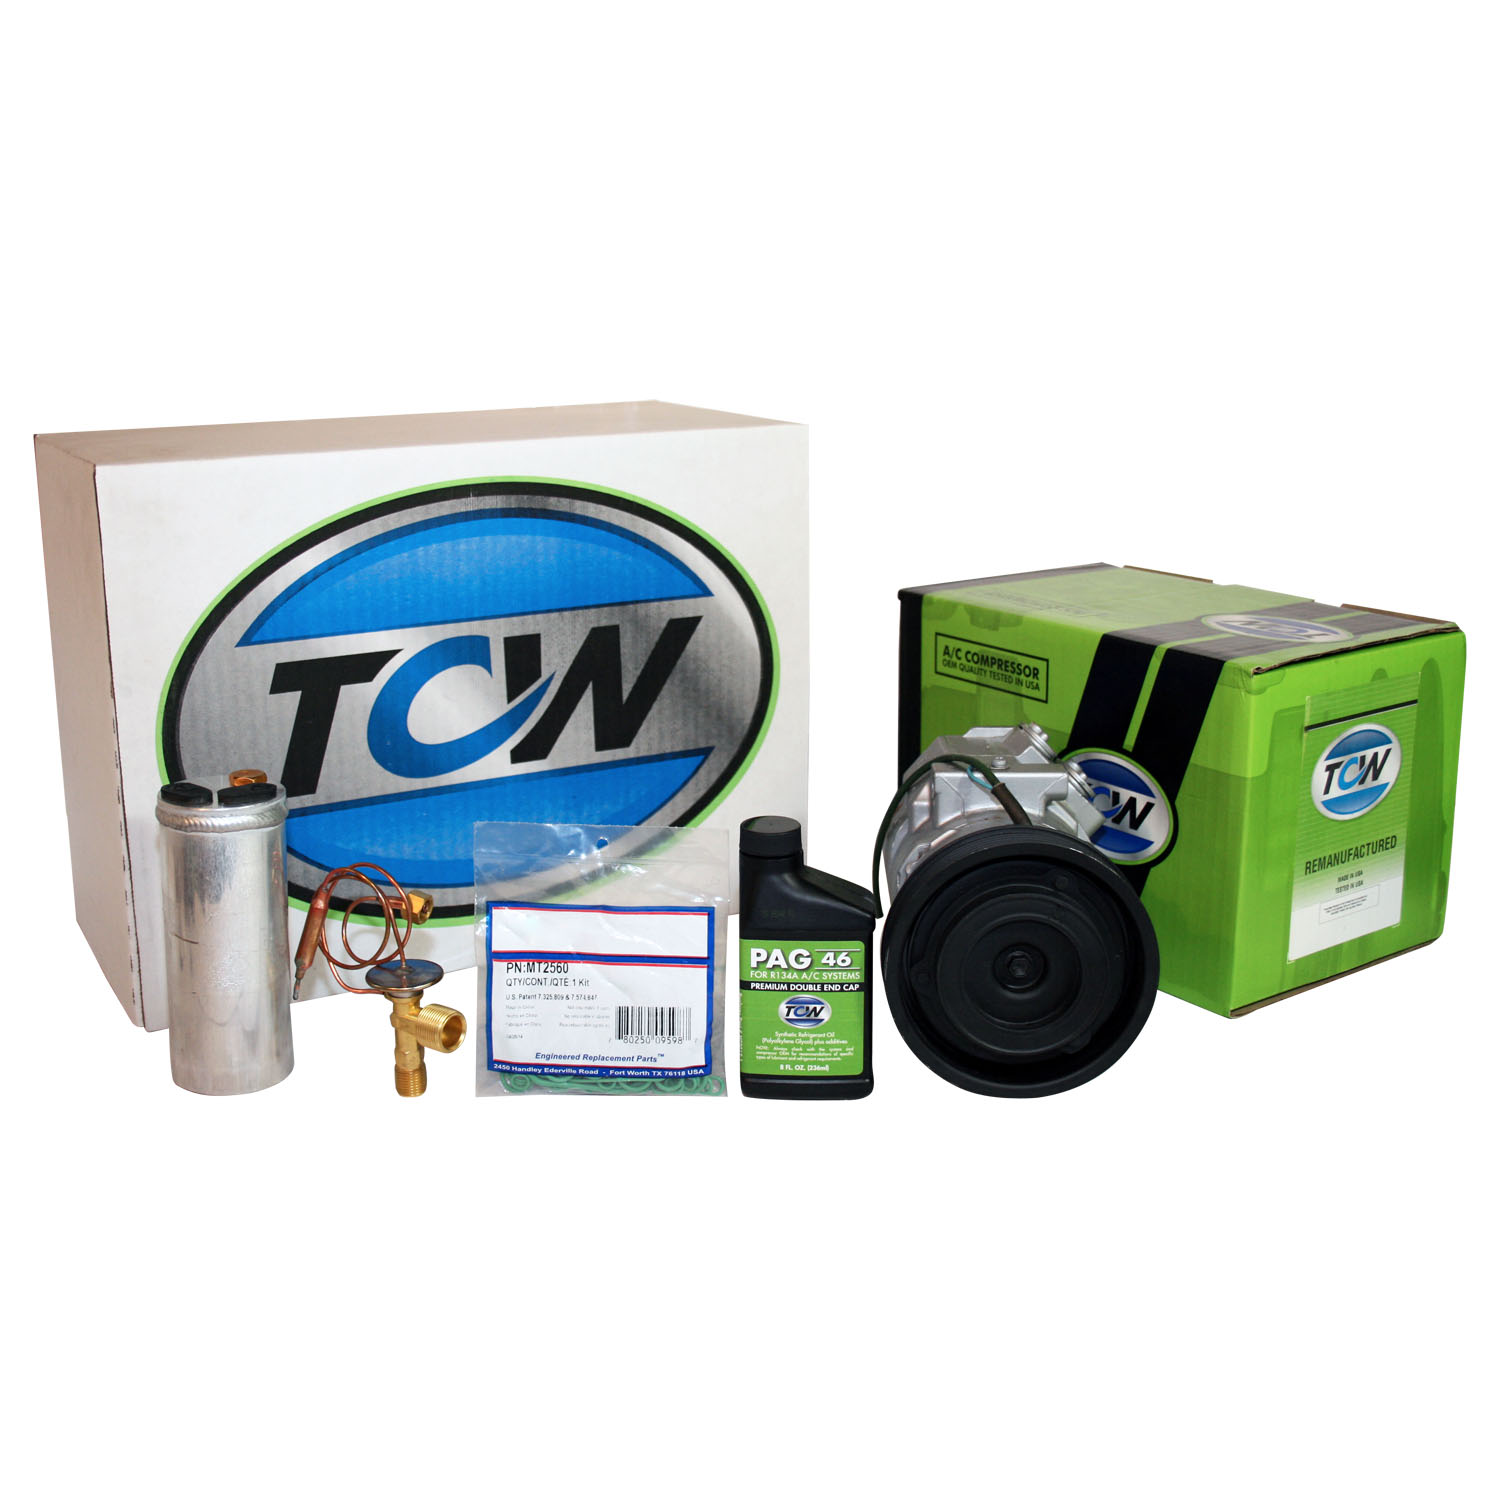 TCW Vehicle A/C Kit K1000448R Remanufactured Product Image field_60b6a13a6e67c